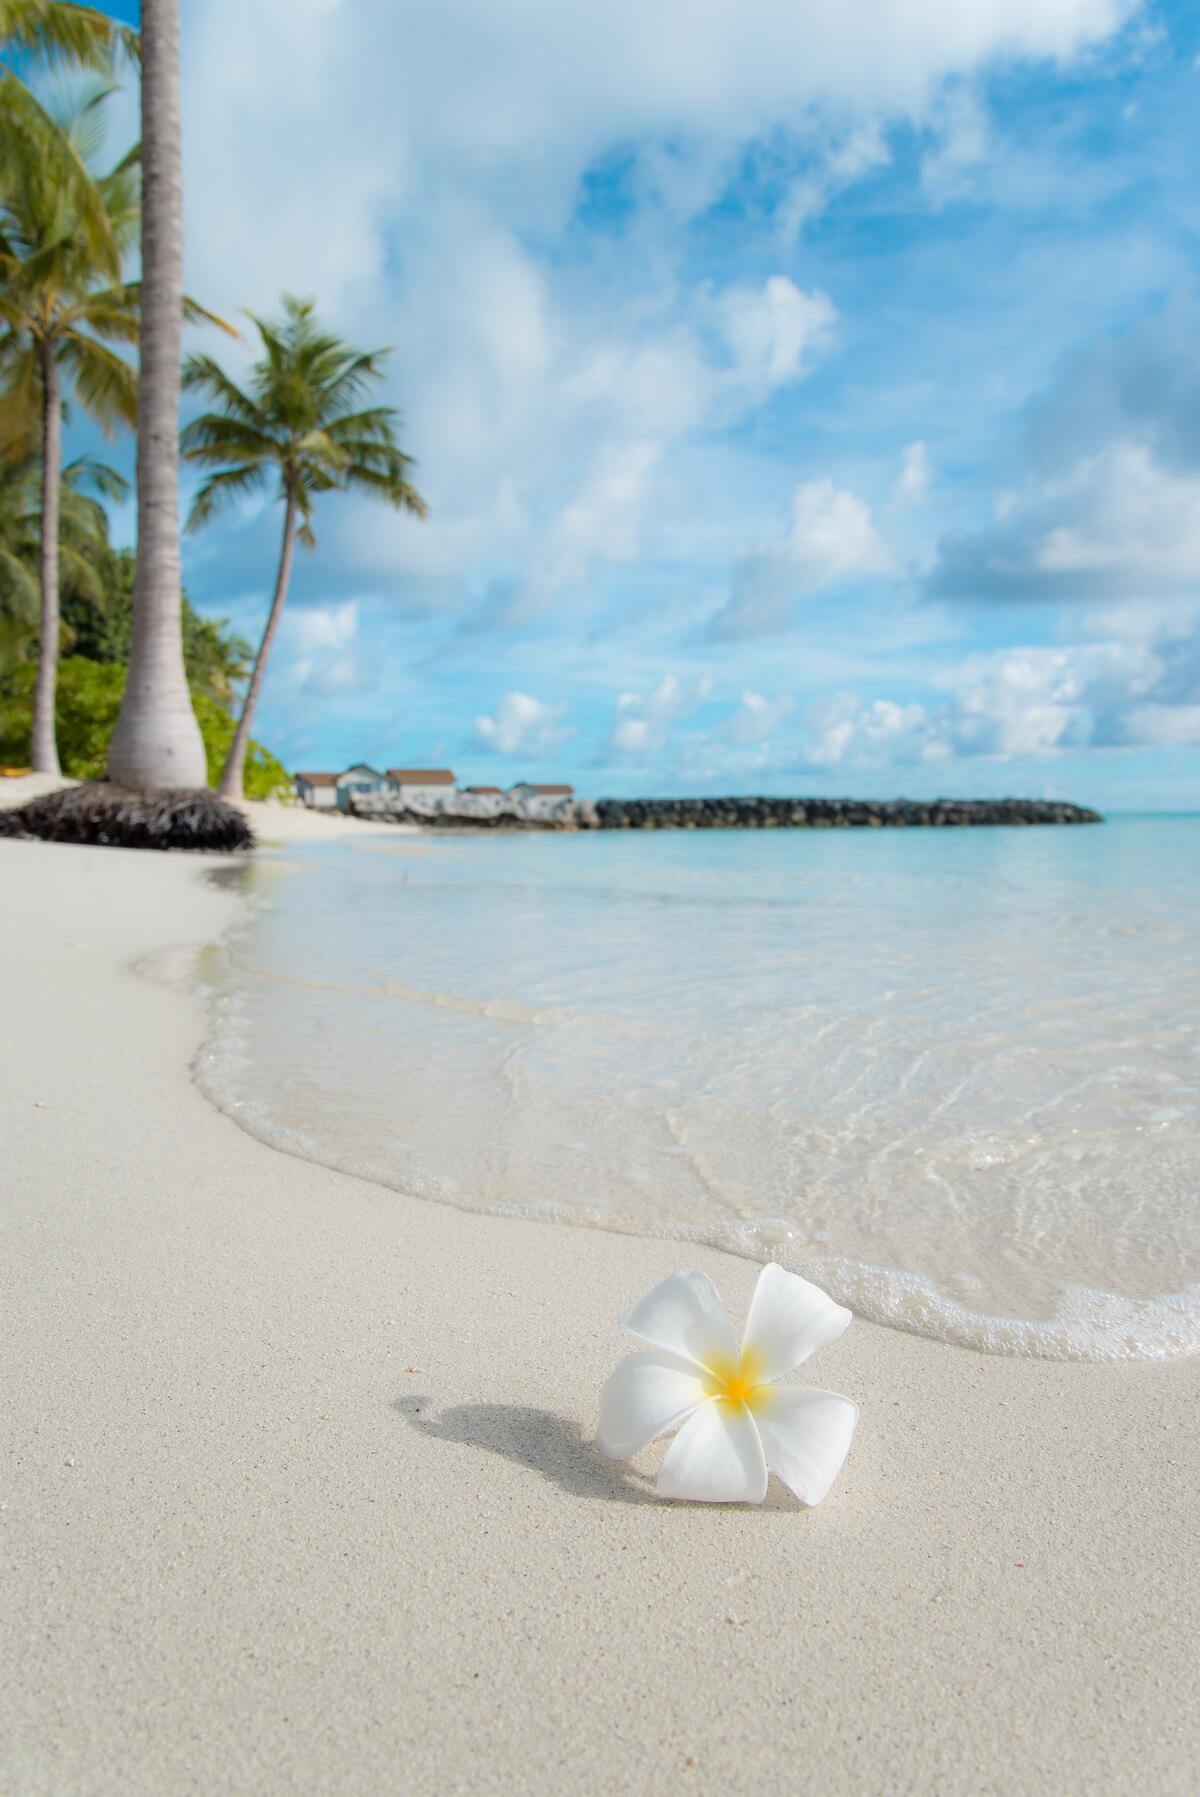 A lonely white flower on a sandy beach